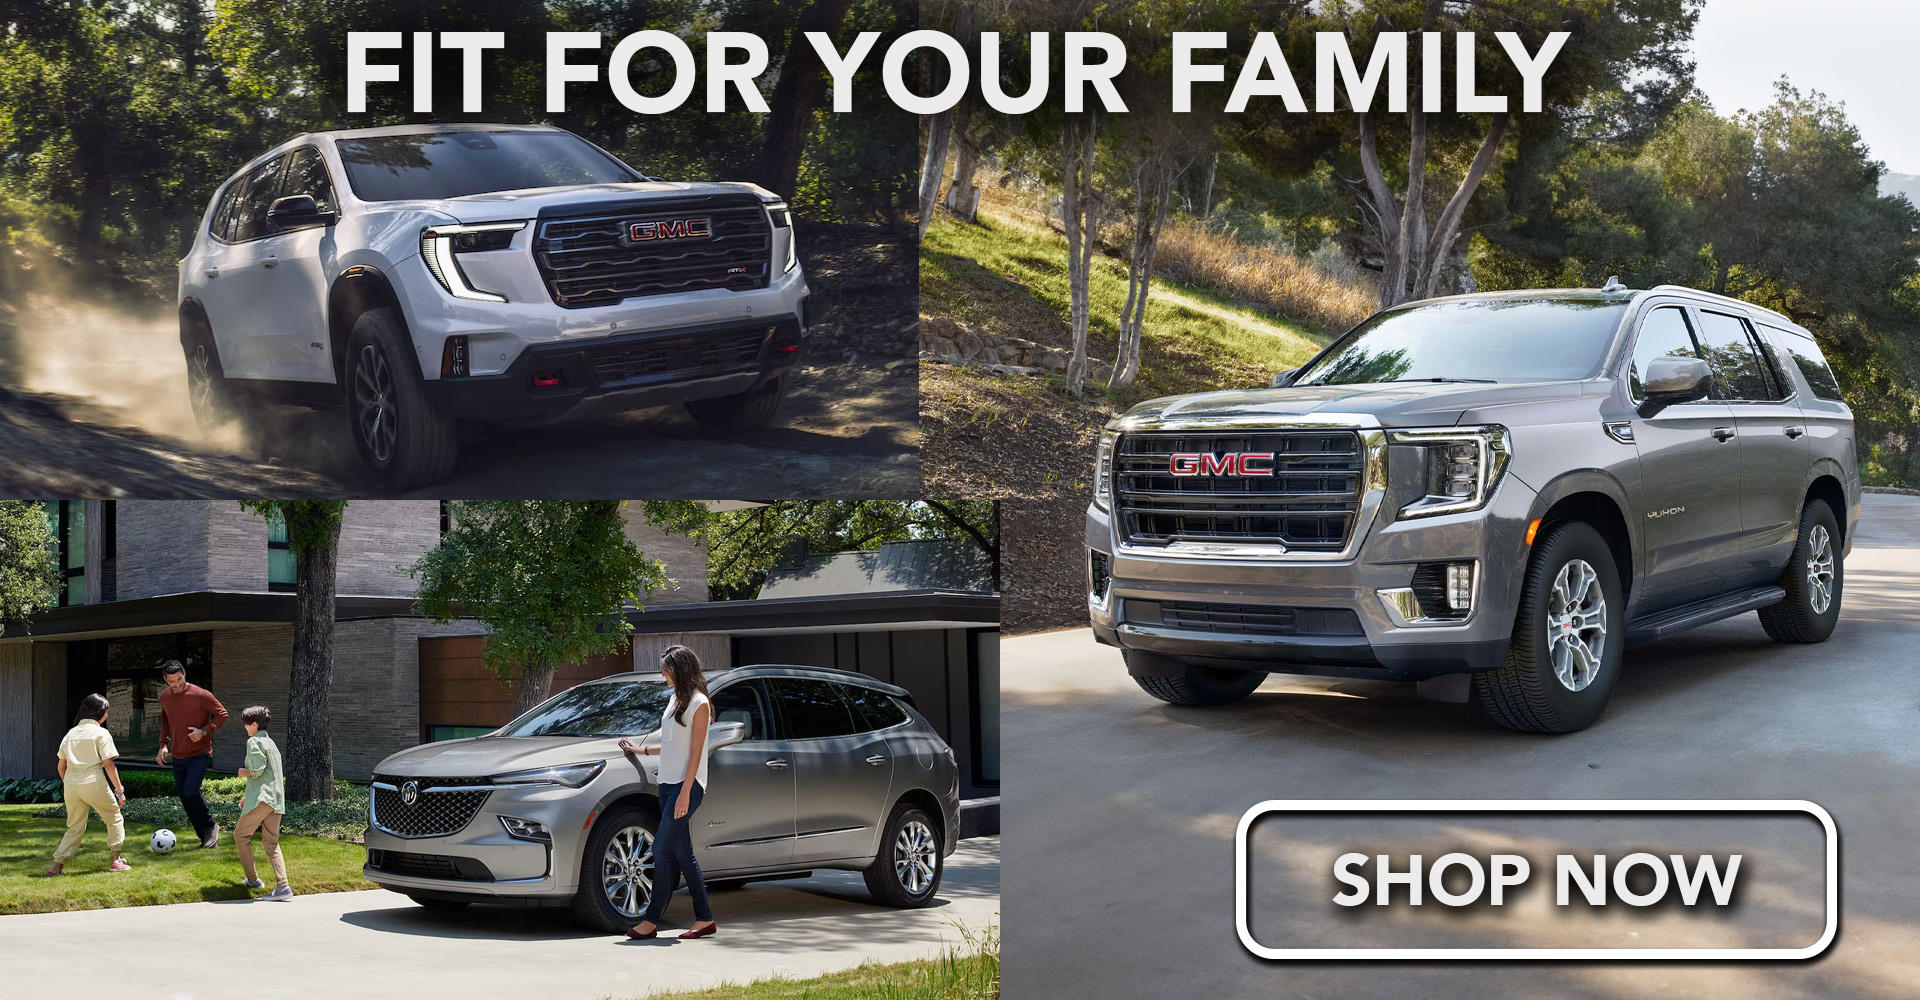 Best Buick GMC Large SUV for Families